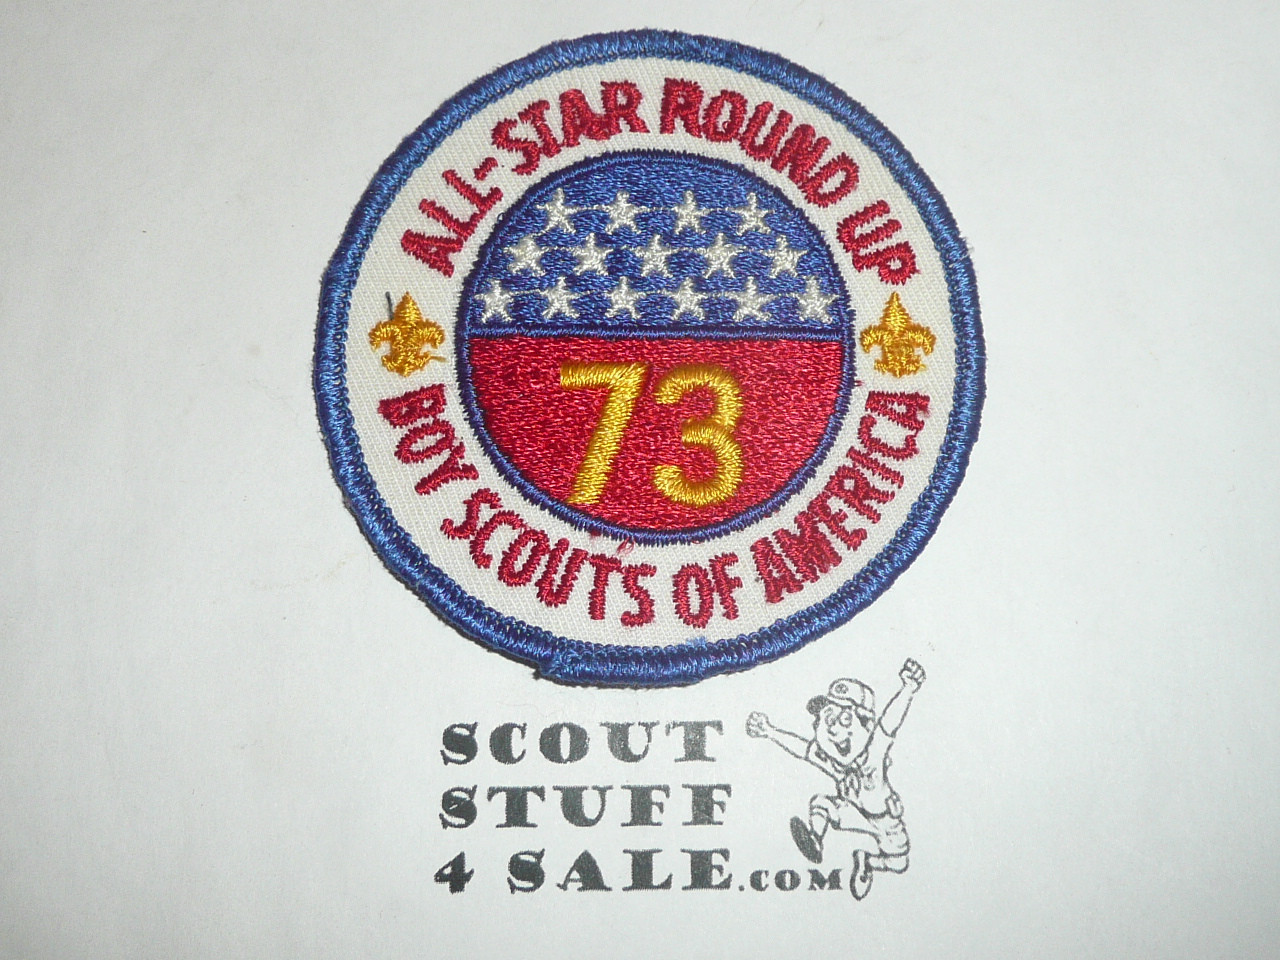 1973 All Star Round-up Patch, Generic BSA issue